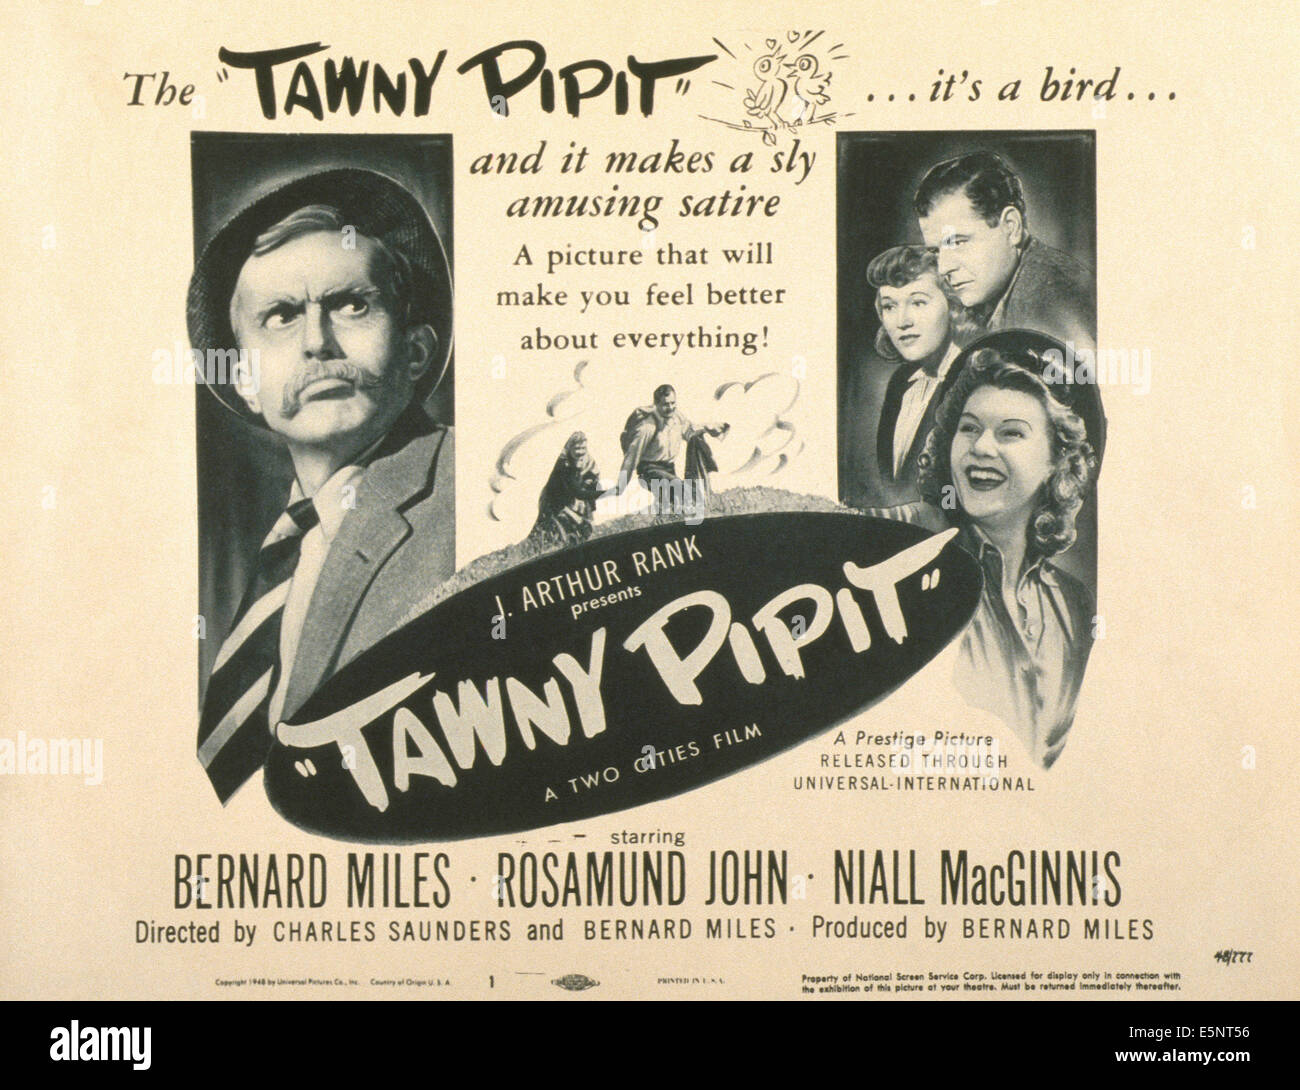 TAWNY PIPIT, US poster, Bernard Miles (left), right from left: Rosamund John (and front), Niall MacGinnis, 1944 Stock Photo